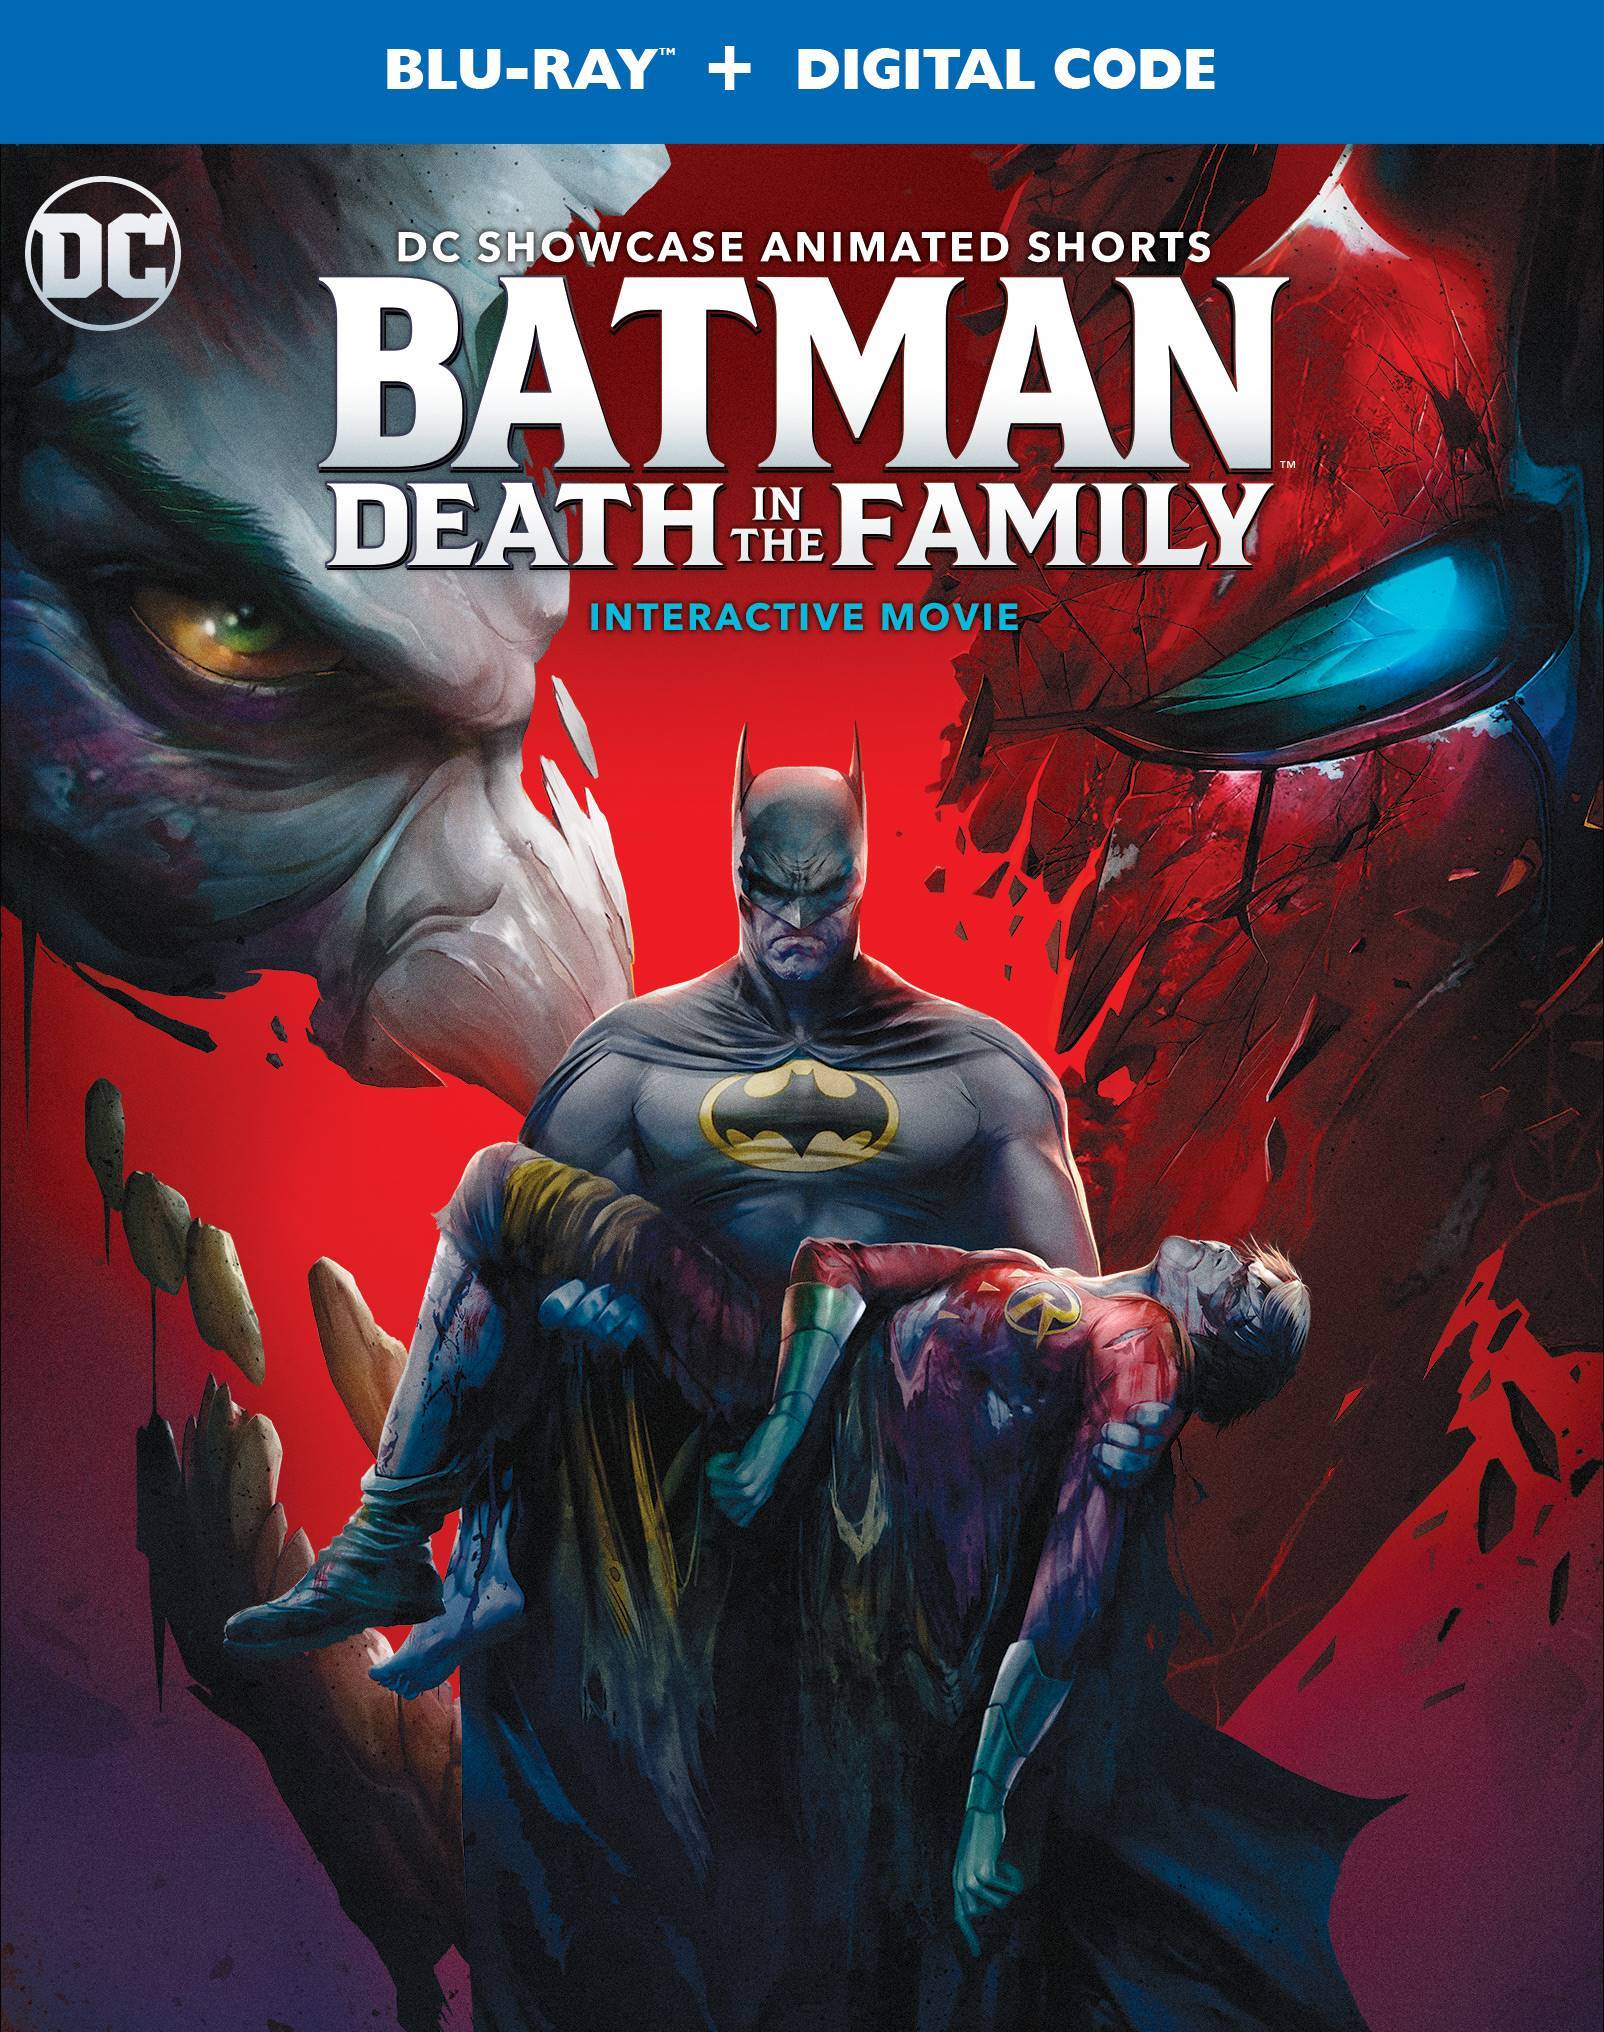 Jason Todd's fate is in your hands with the interactive BATMAN: DEATH IN THE FAMILY animated film